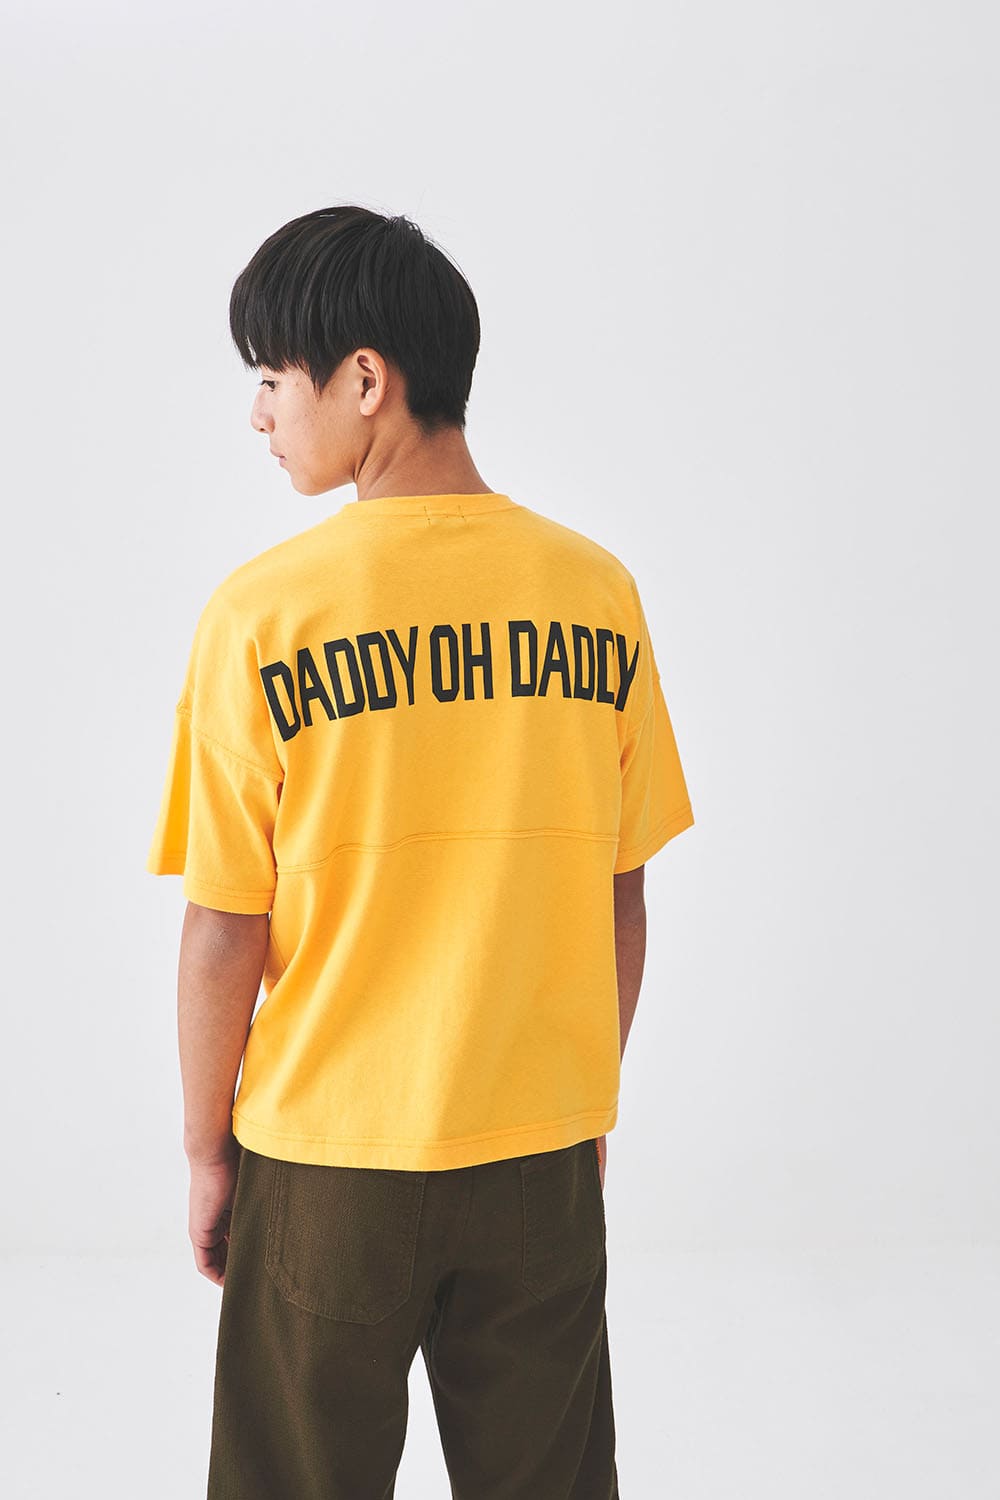 2023 SUMMER Daddy Oh Daddy STYLE27